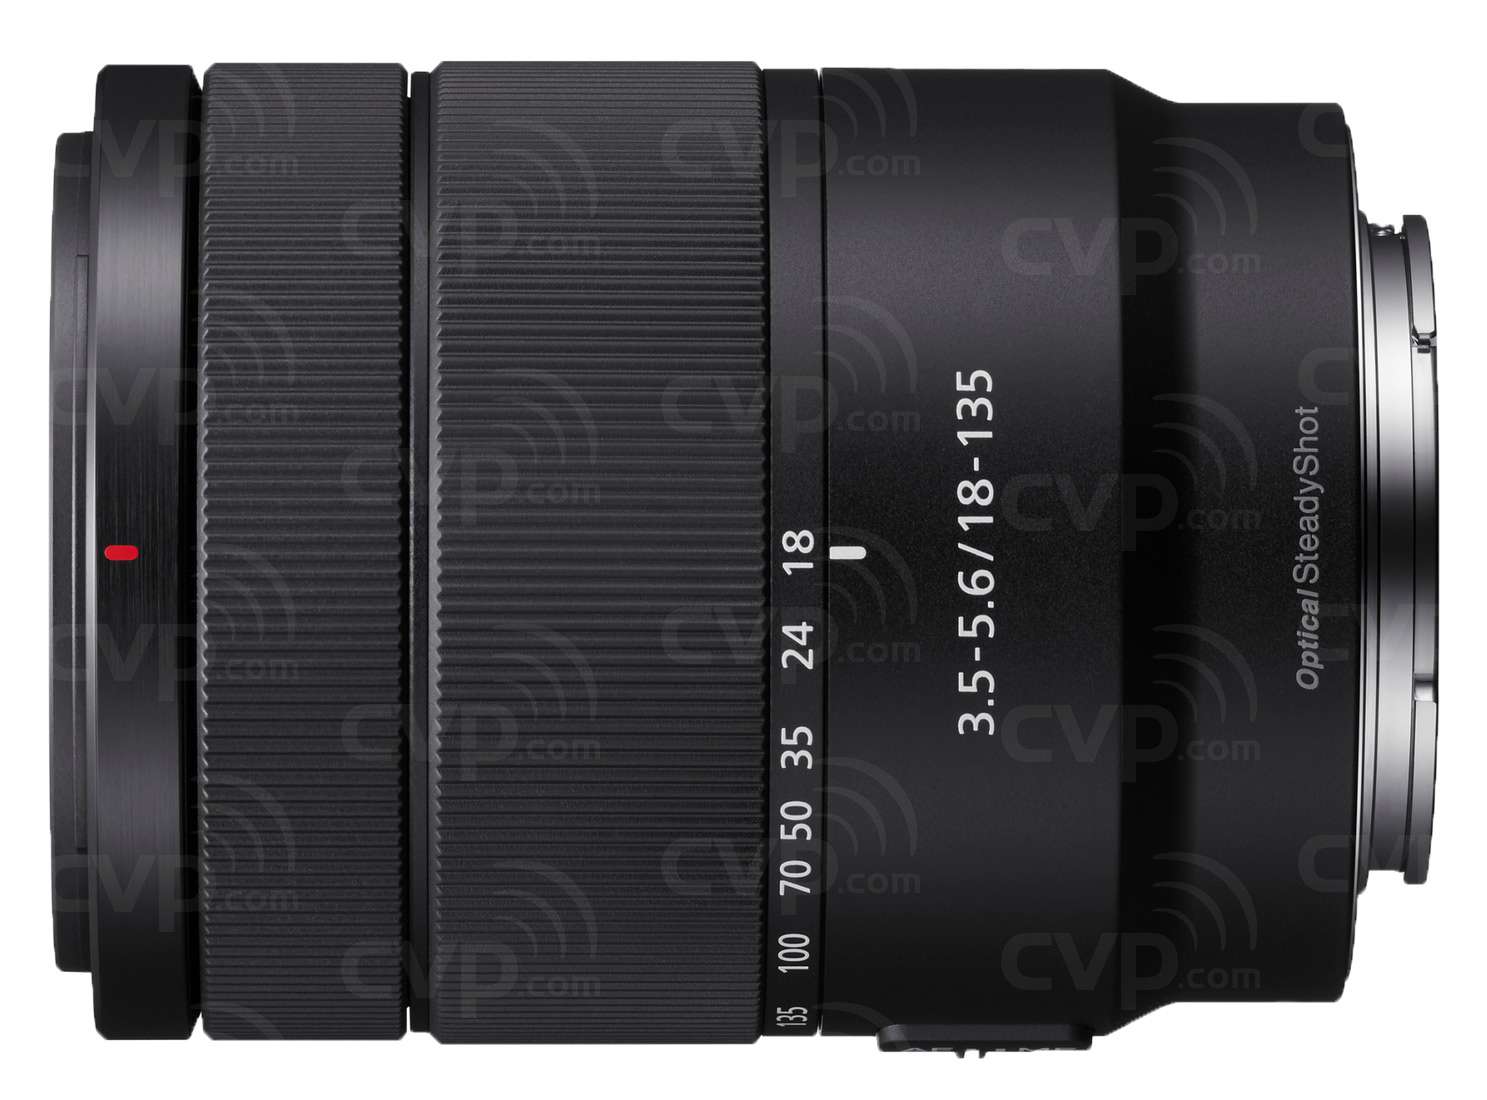 Buy - Sony 18-135mm F3.5-5.6 OSS High Magnification Zoom ...